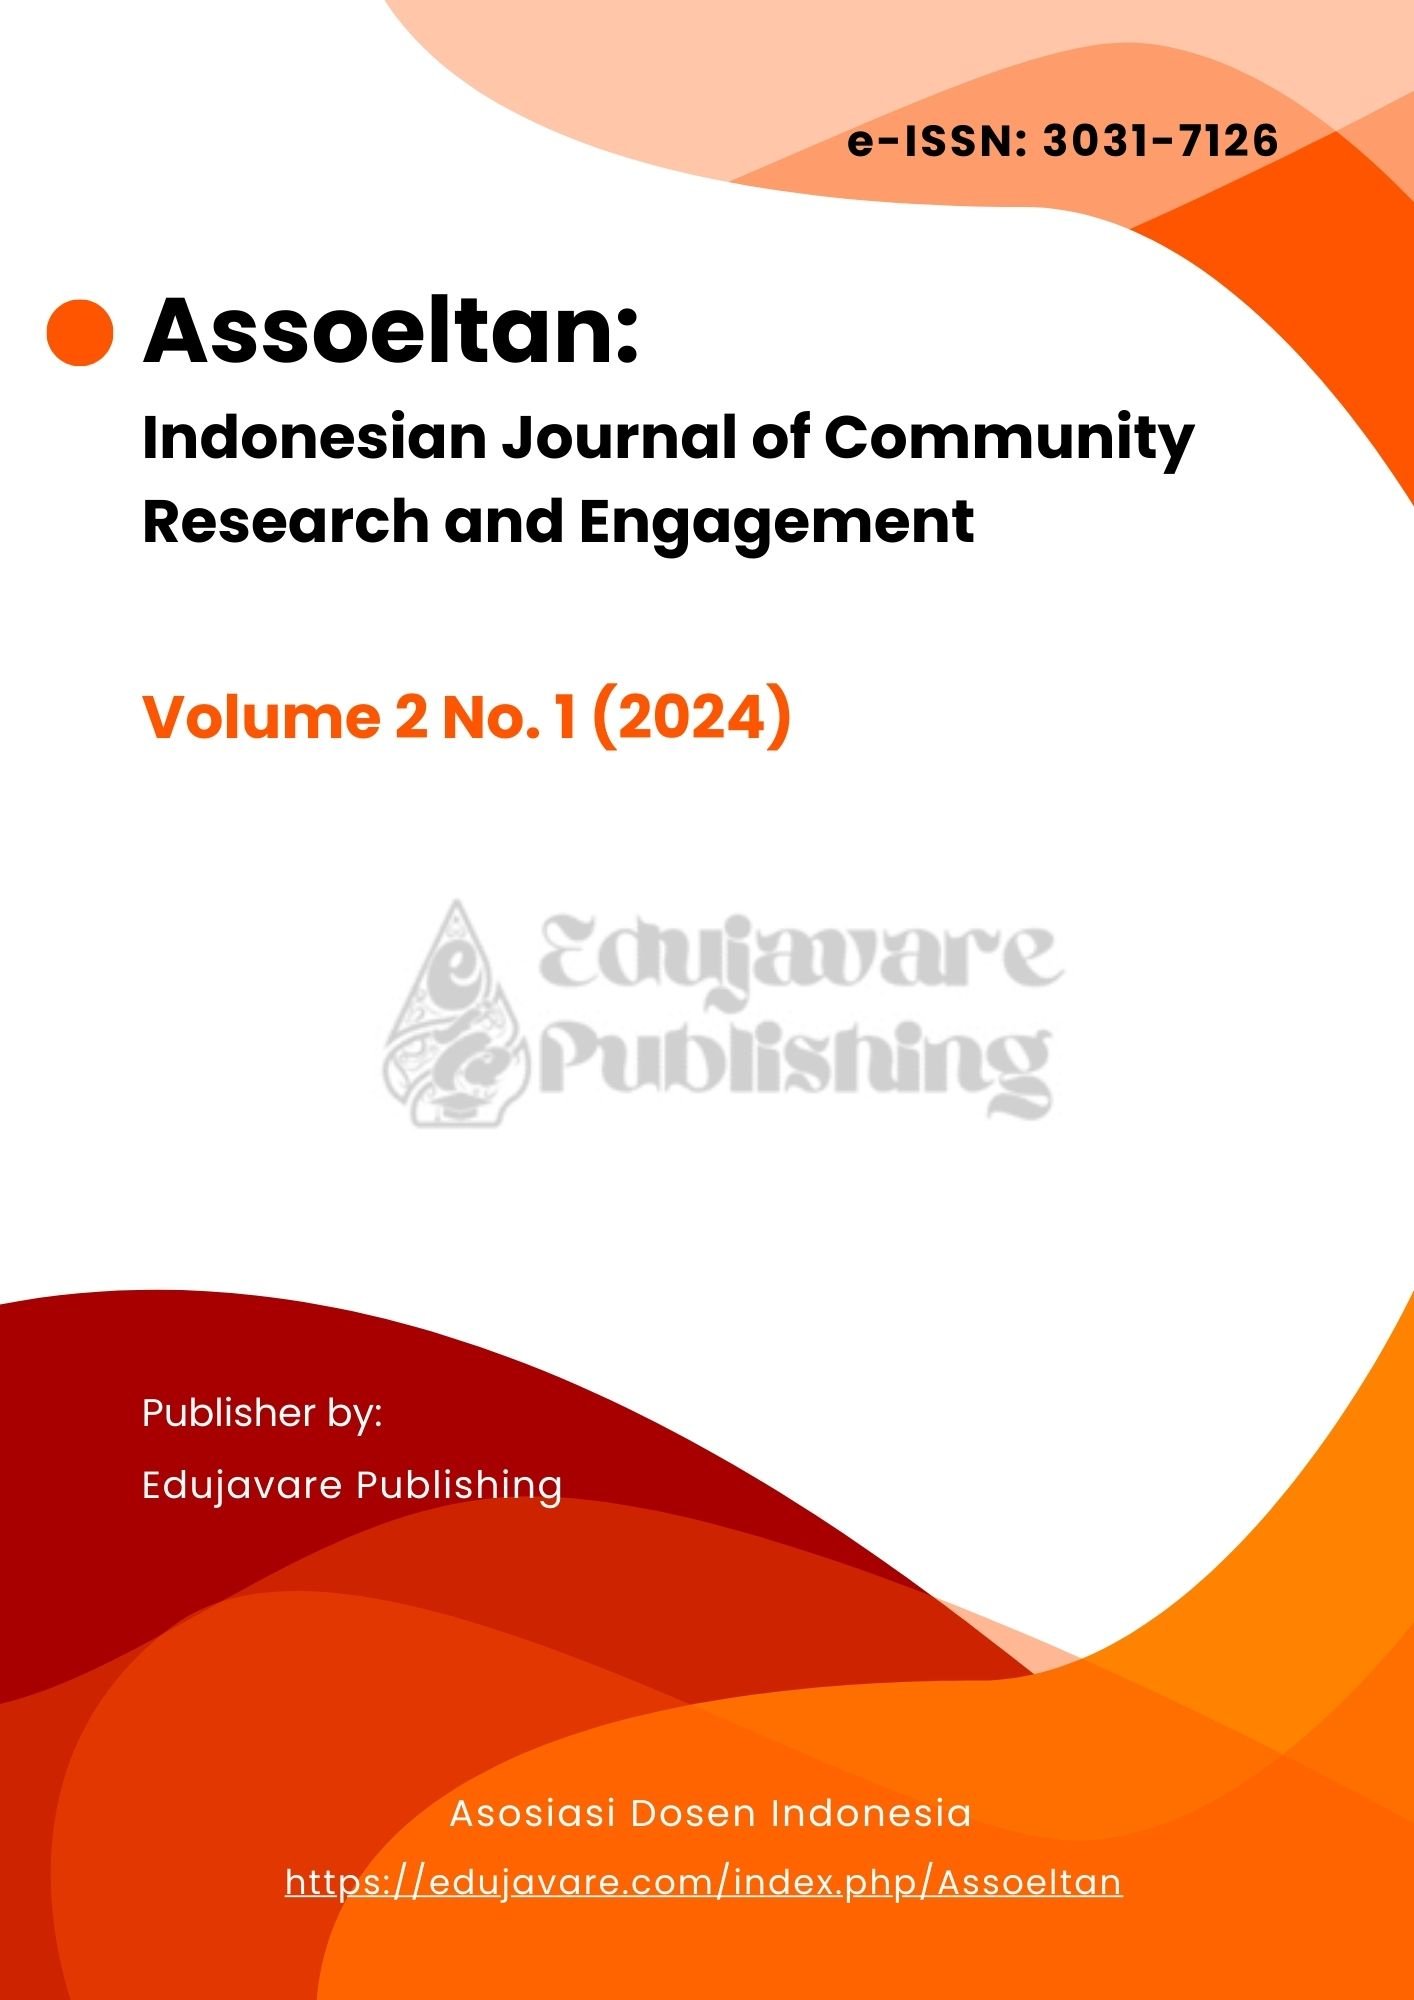 					View Vol. 2 No. 1 (2024): Indonesian Journal of Community Research and Engagement
				